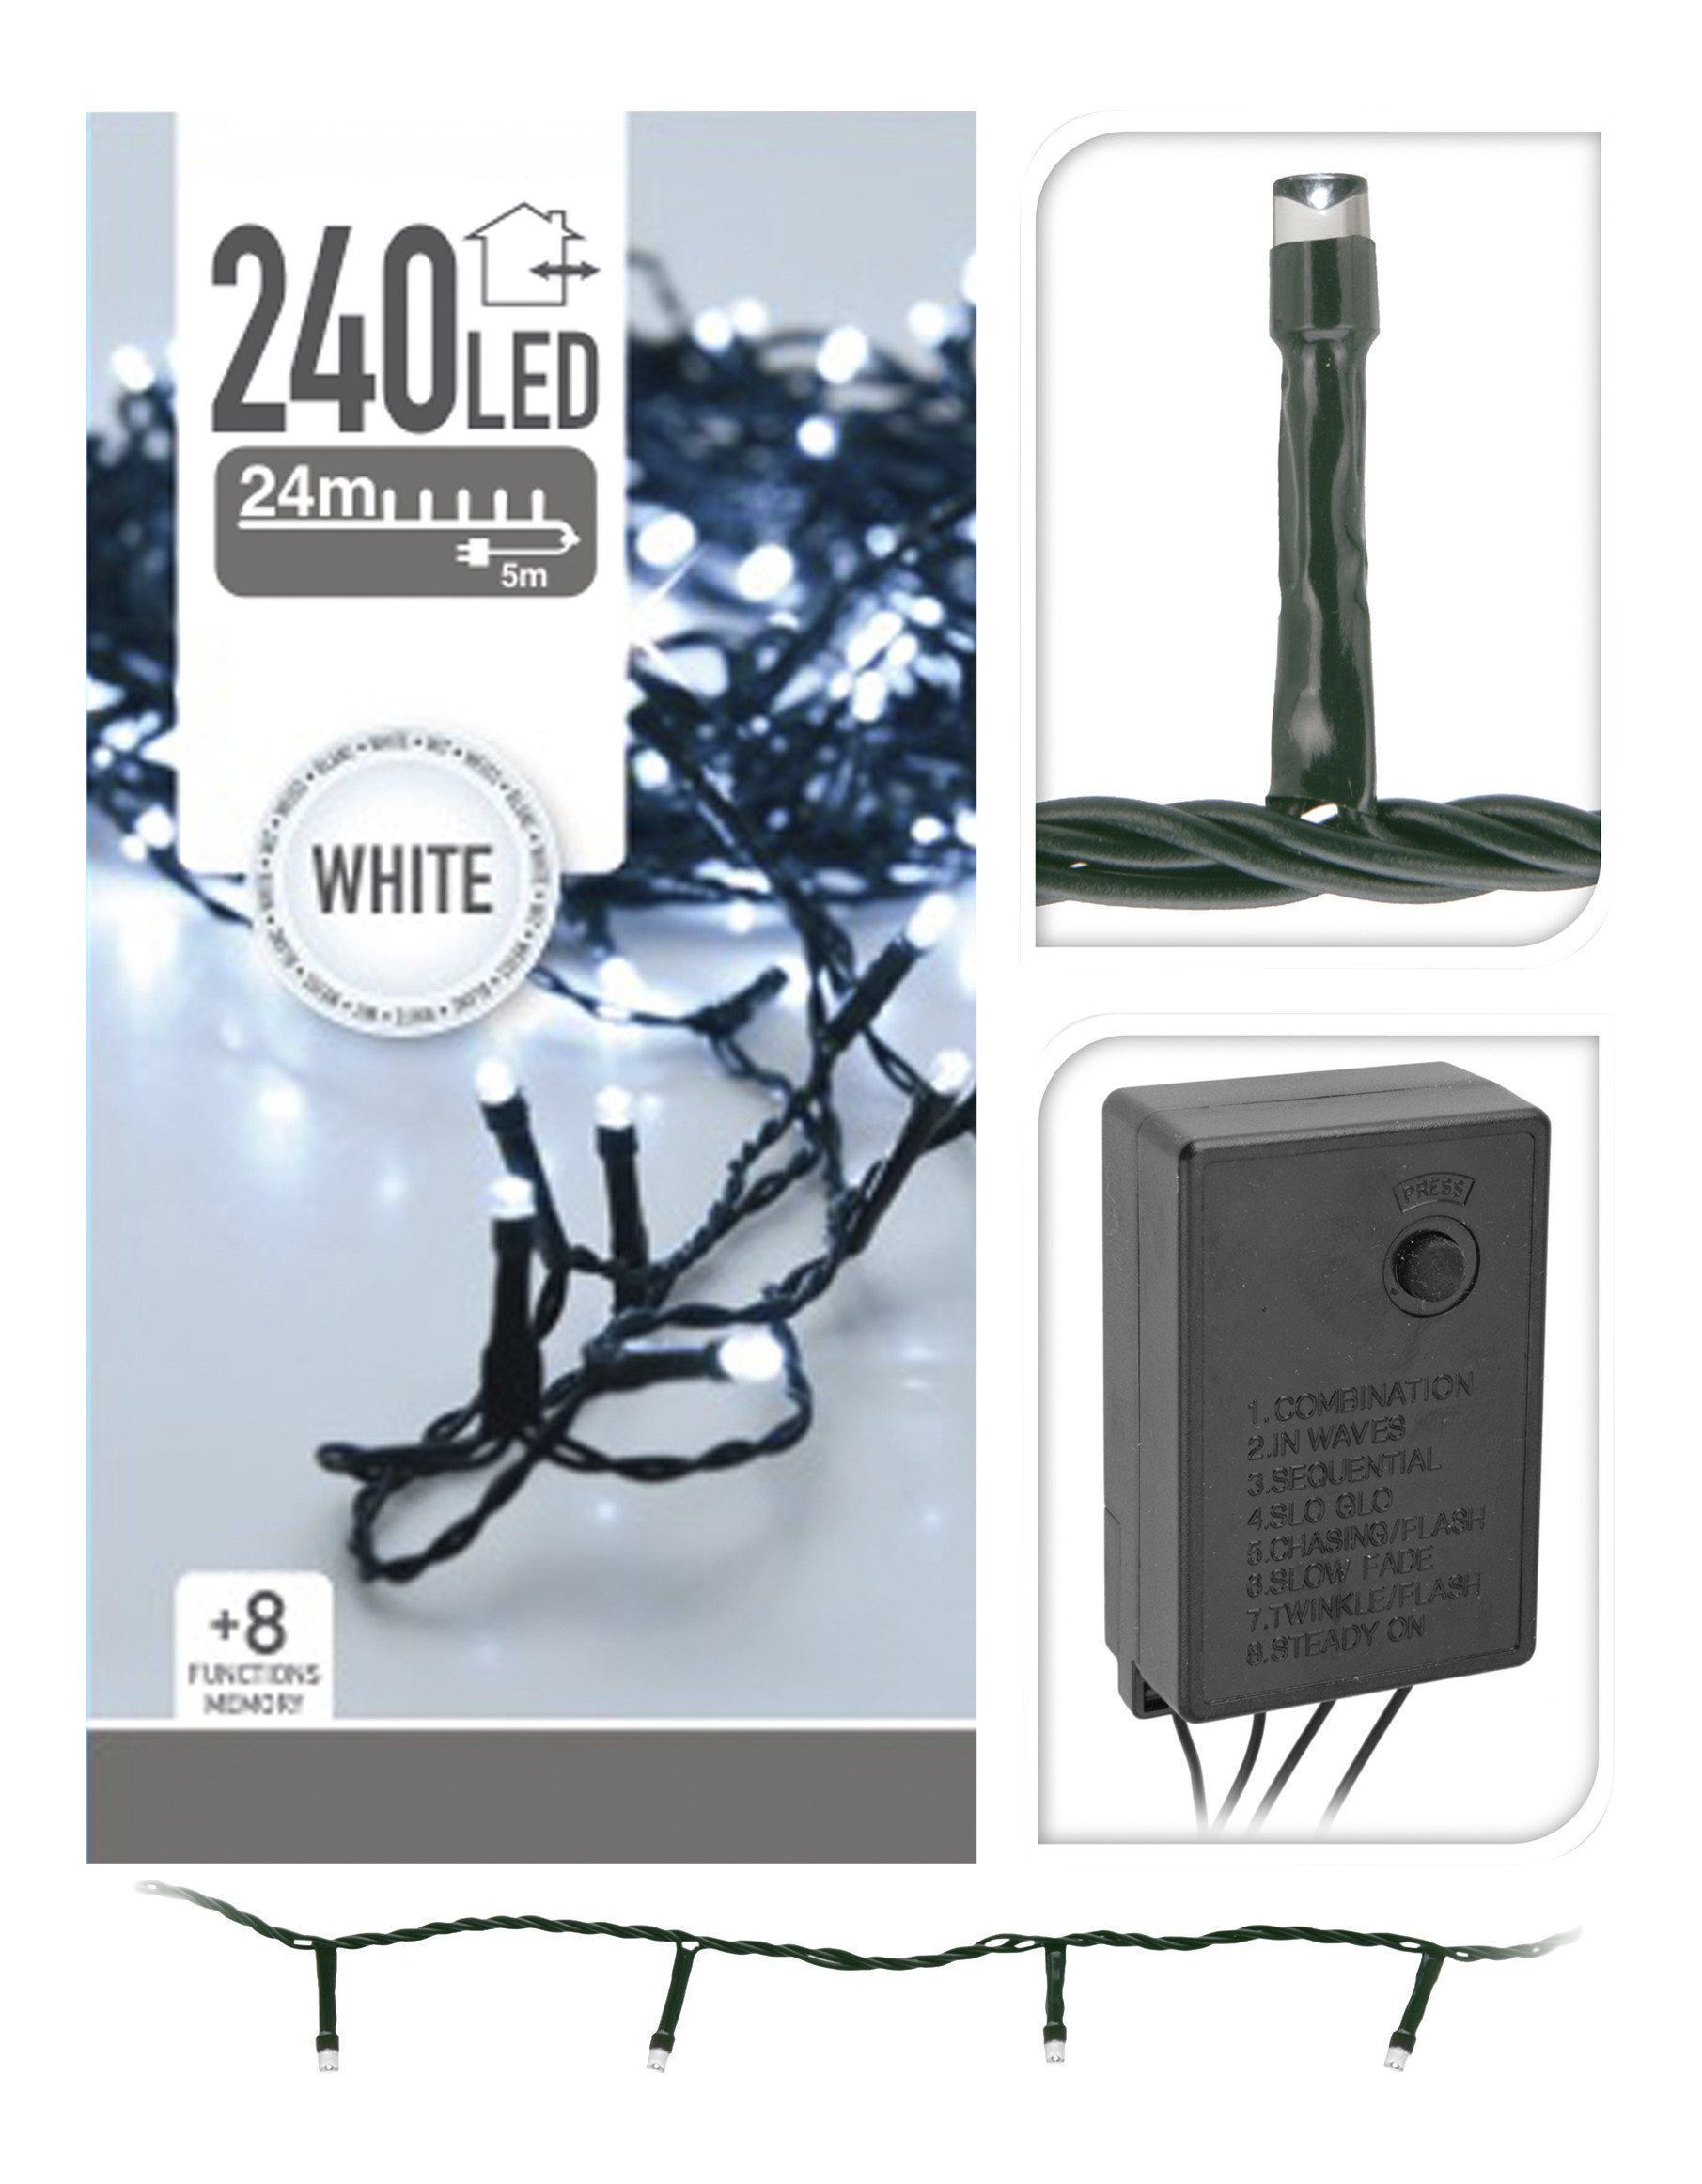 240 Ice White LED String Lights from The Christmas Forest